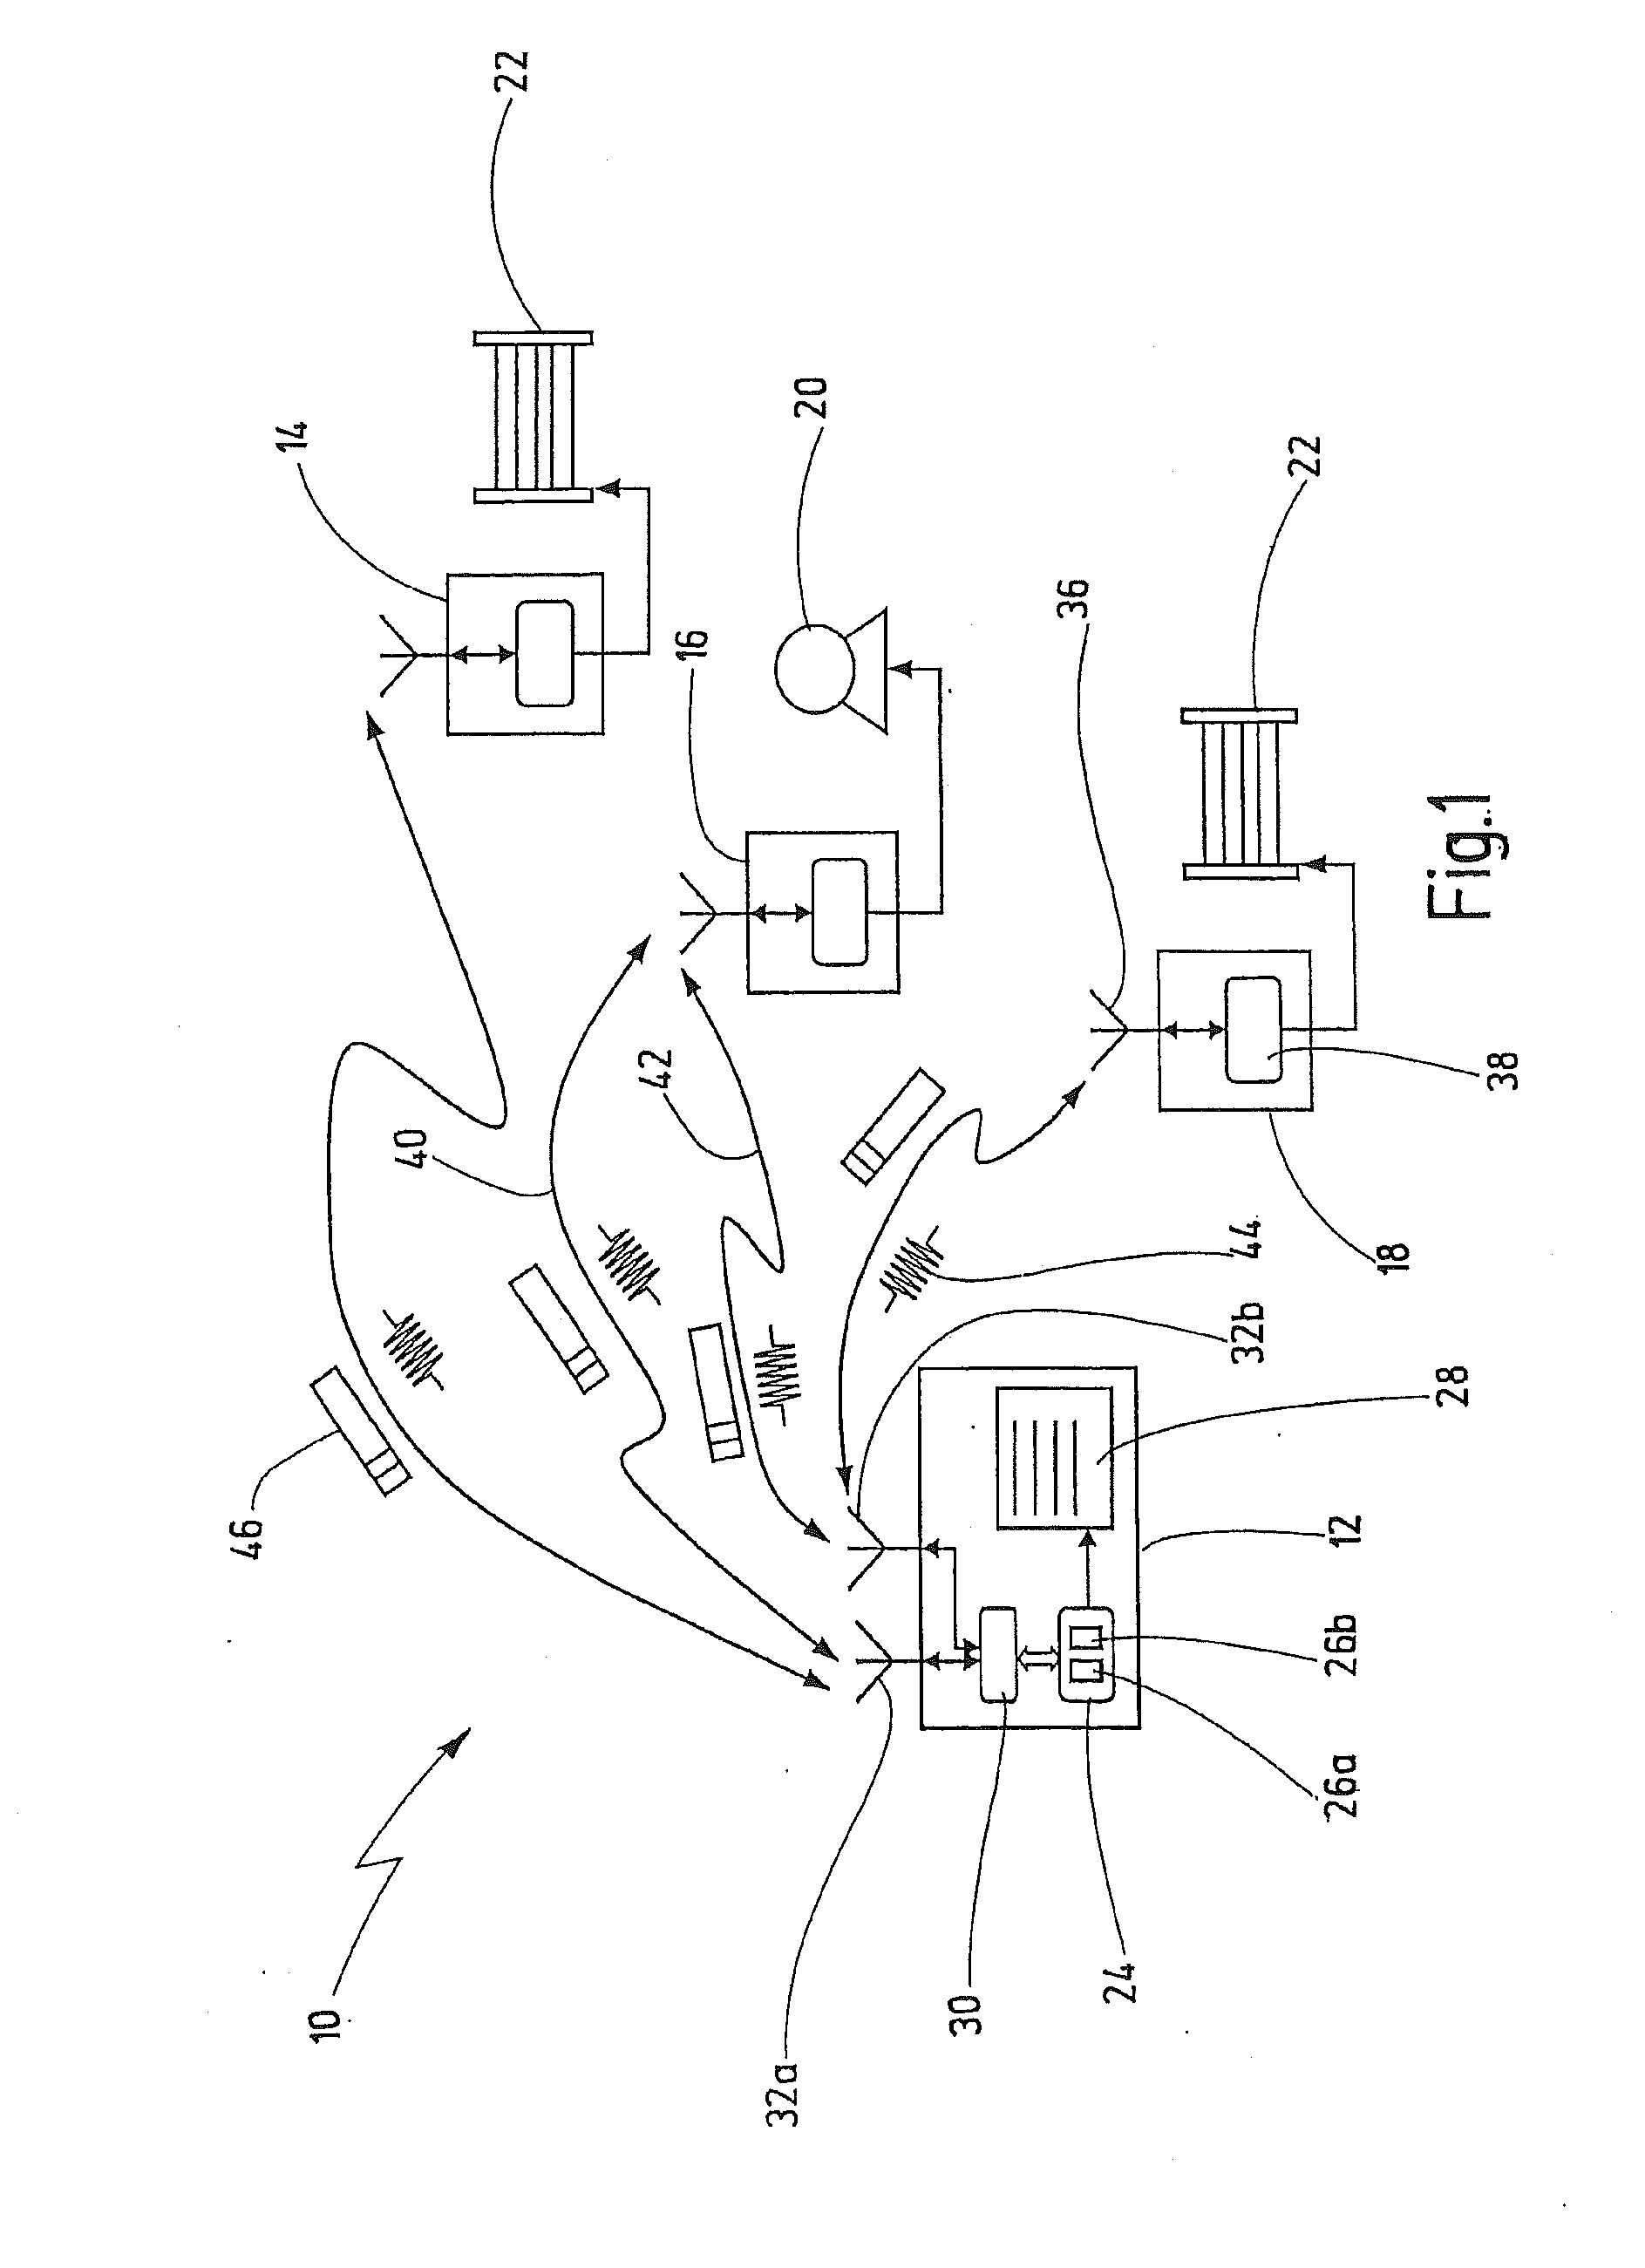 Microwave antenna for wireless networking of devices in automation technology